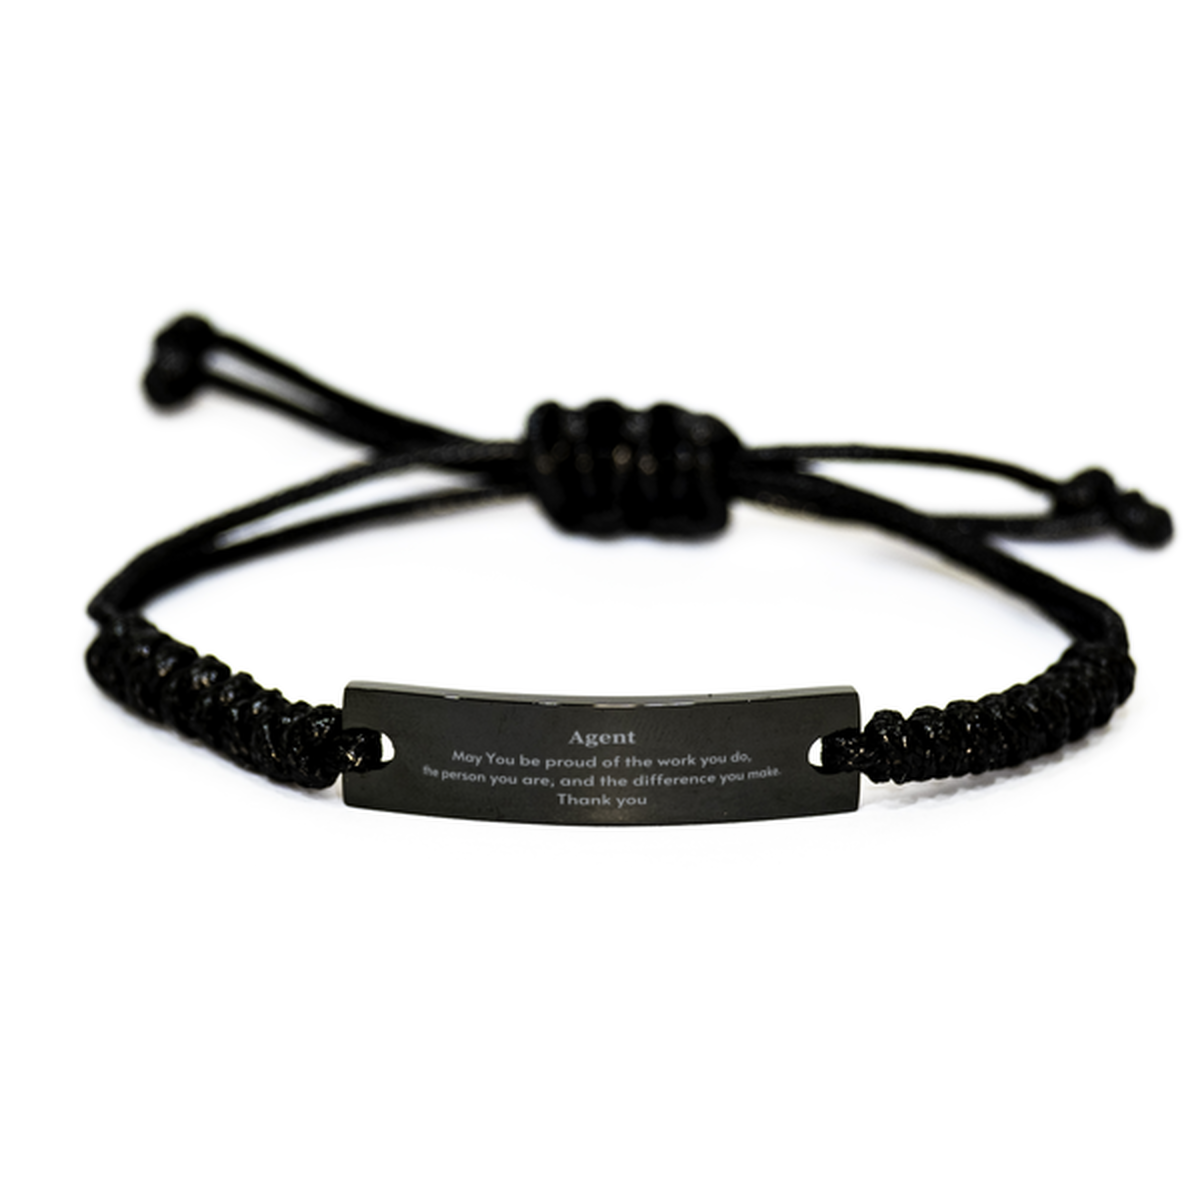 Heartwarming Black Rope Bracelet Retirement Coworkers Gifts for Agent, Agent May You be proud of the work you do, the person you are Gifts for Boss Men Women Friends